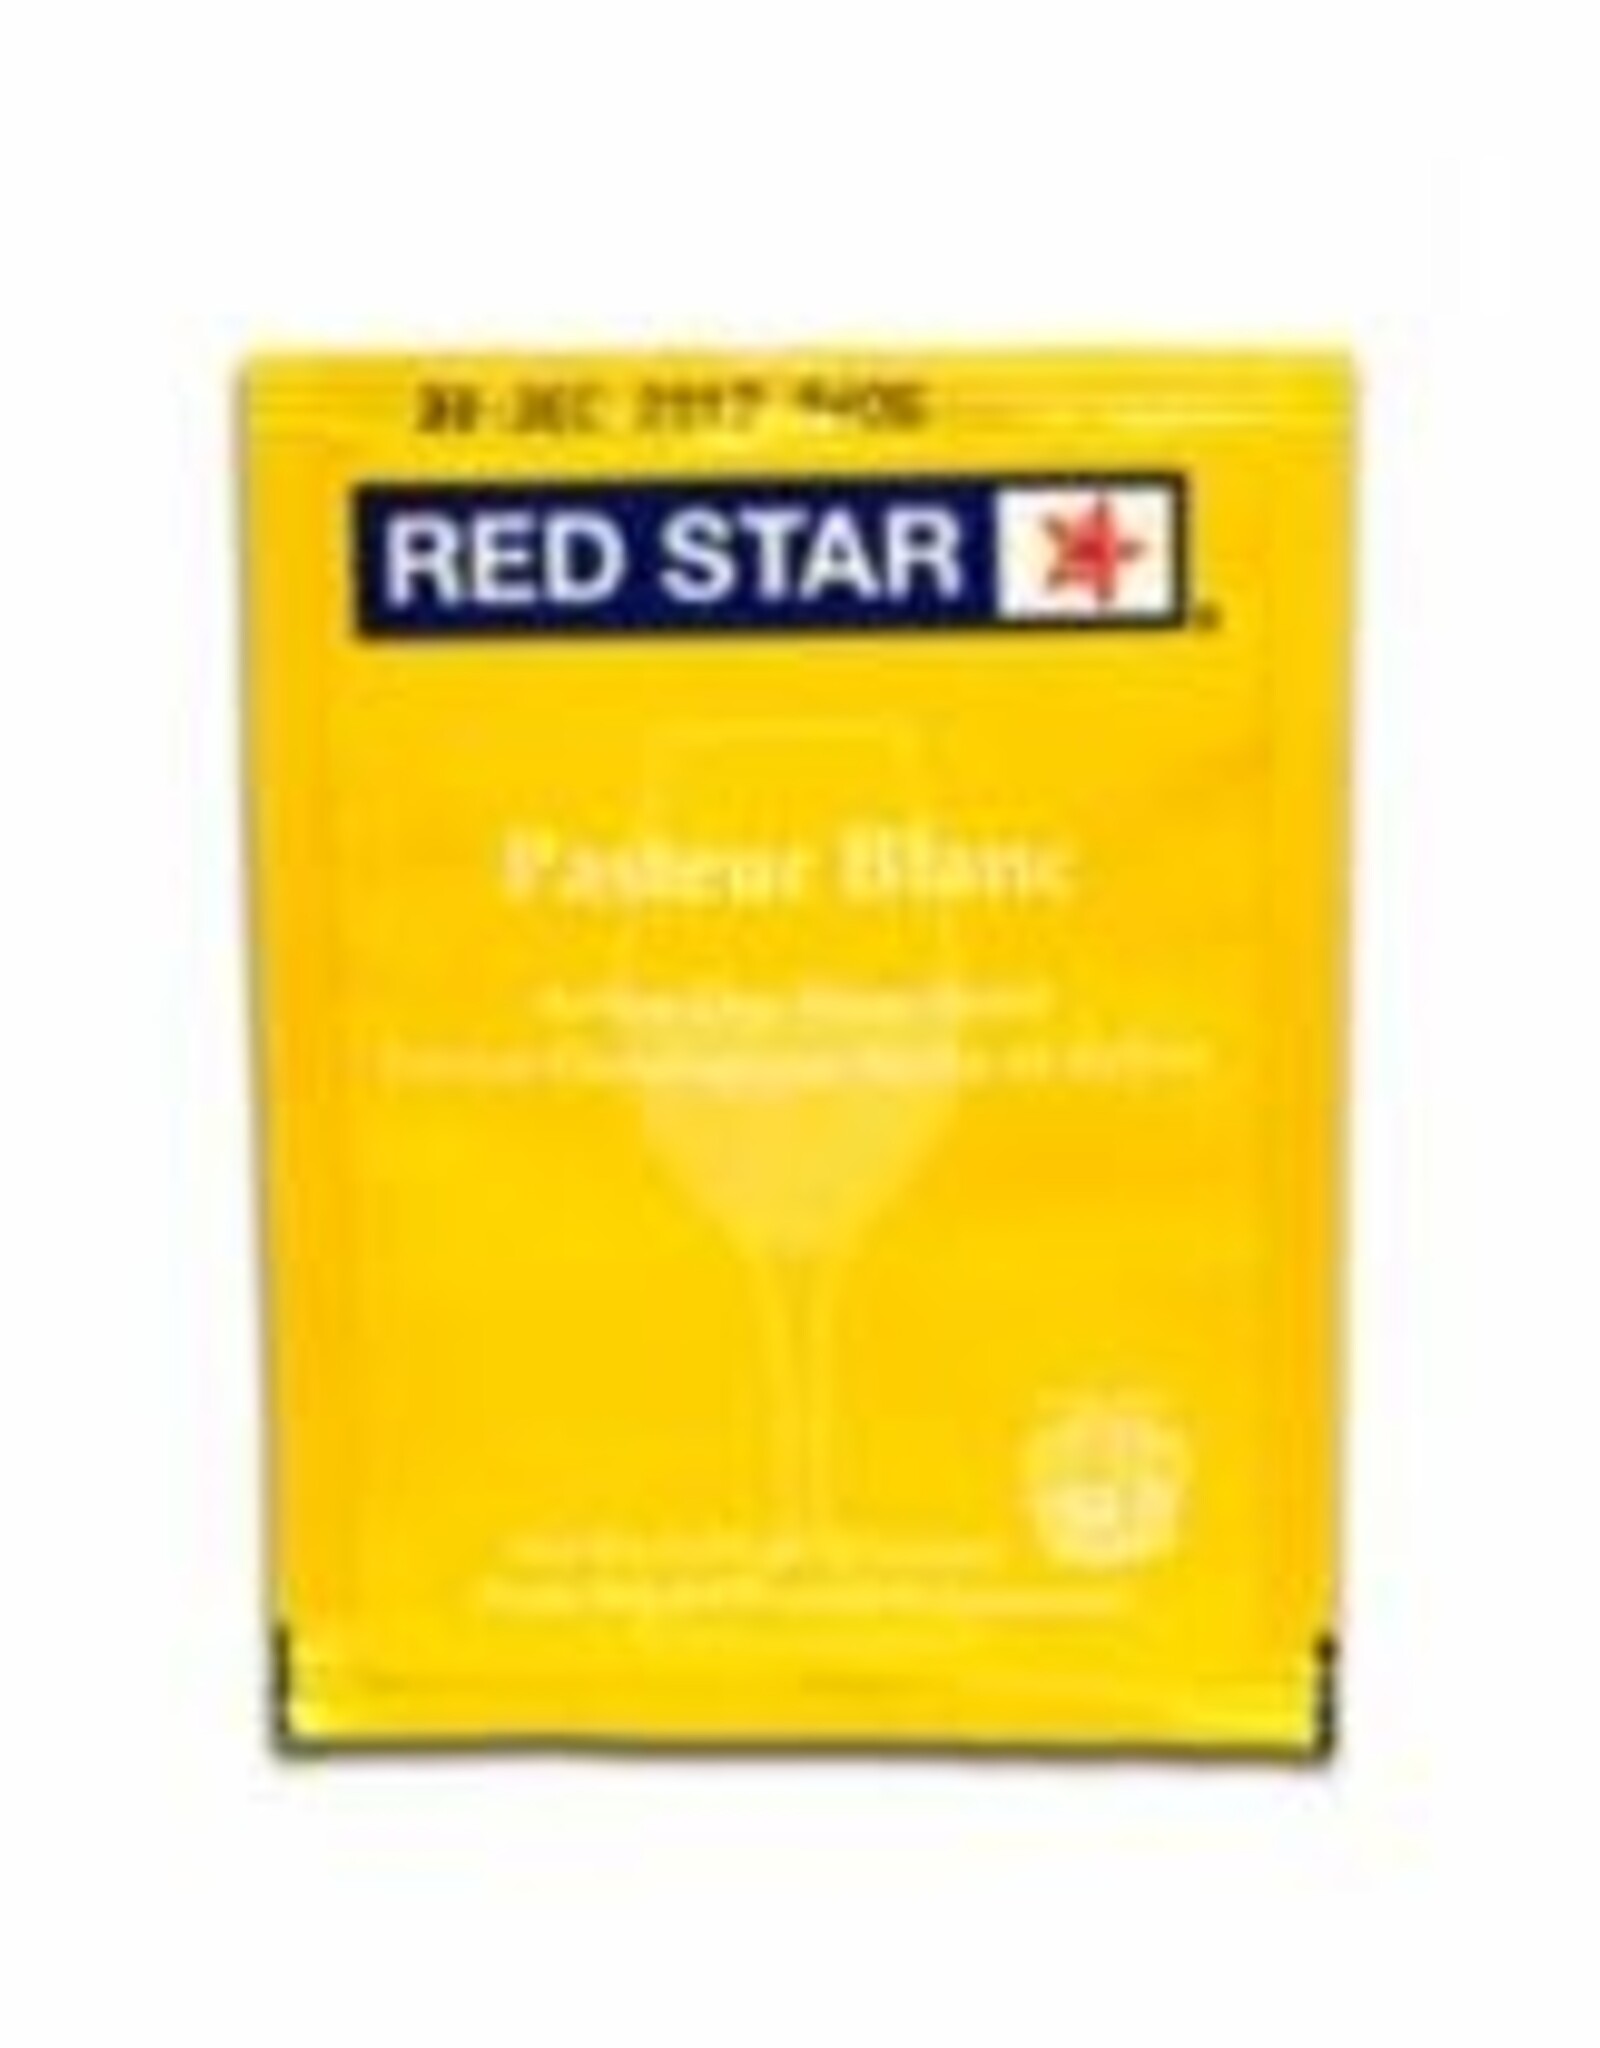 Red Star Premier Blanc (Formerly Champagne)